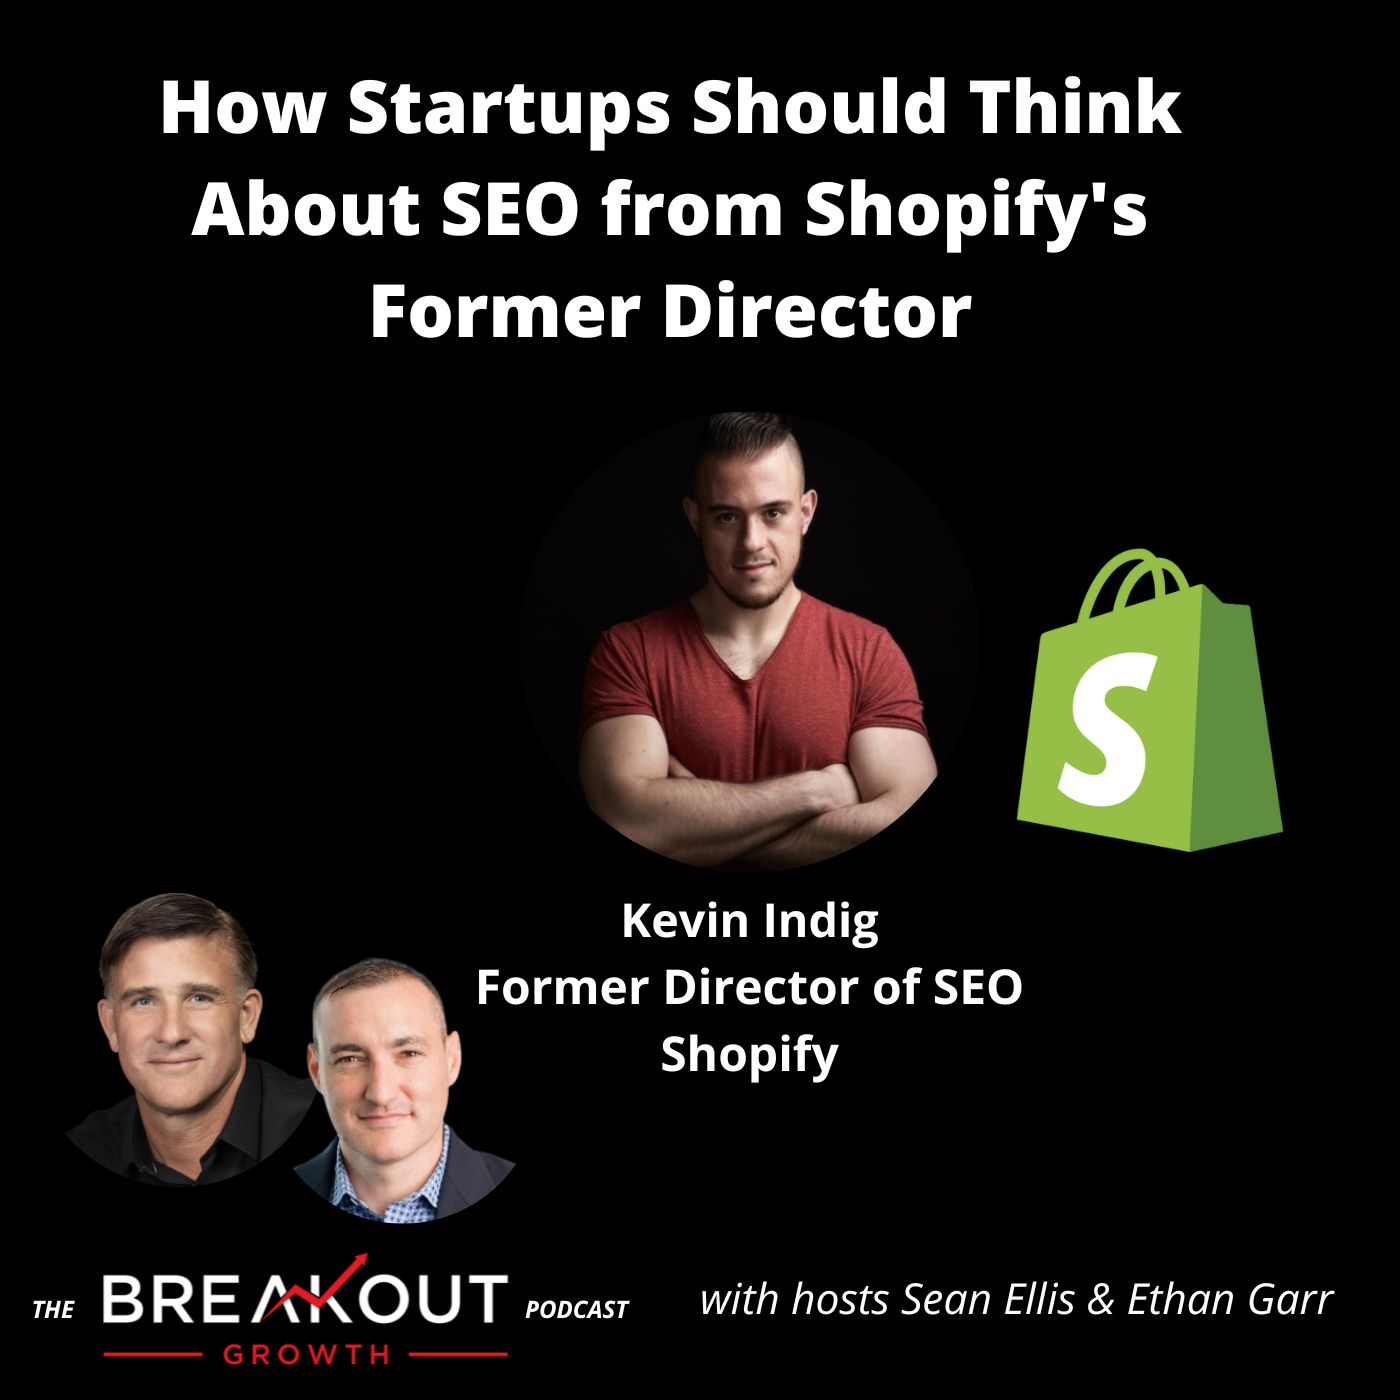 How Startups Should Think About SEO from Shopify's Former Director